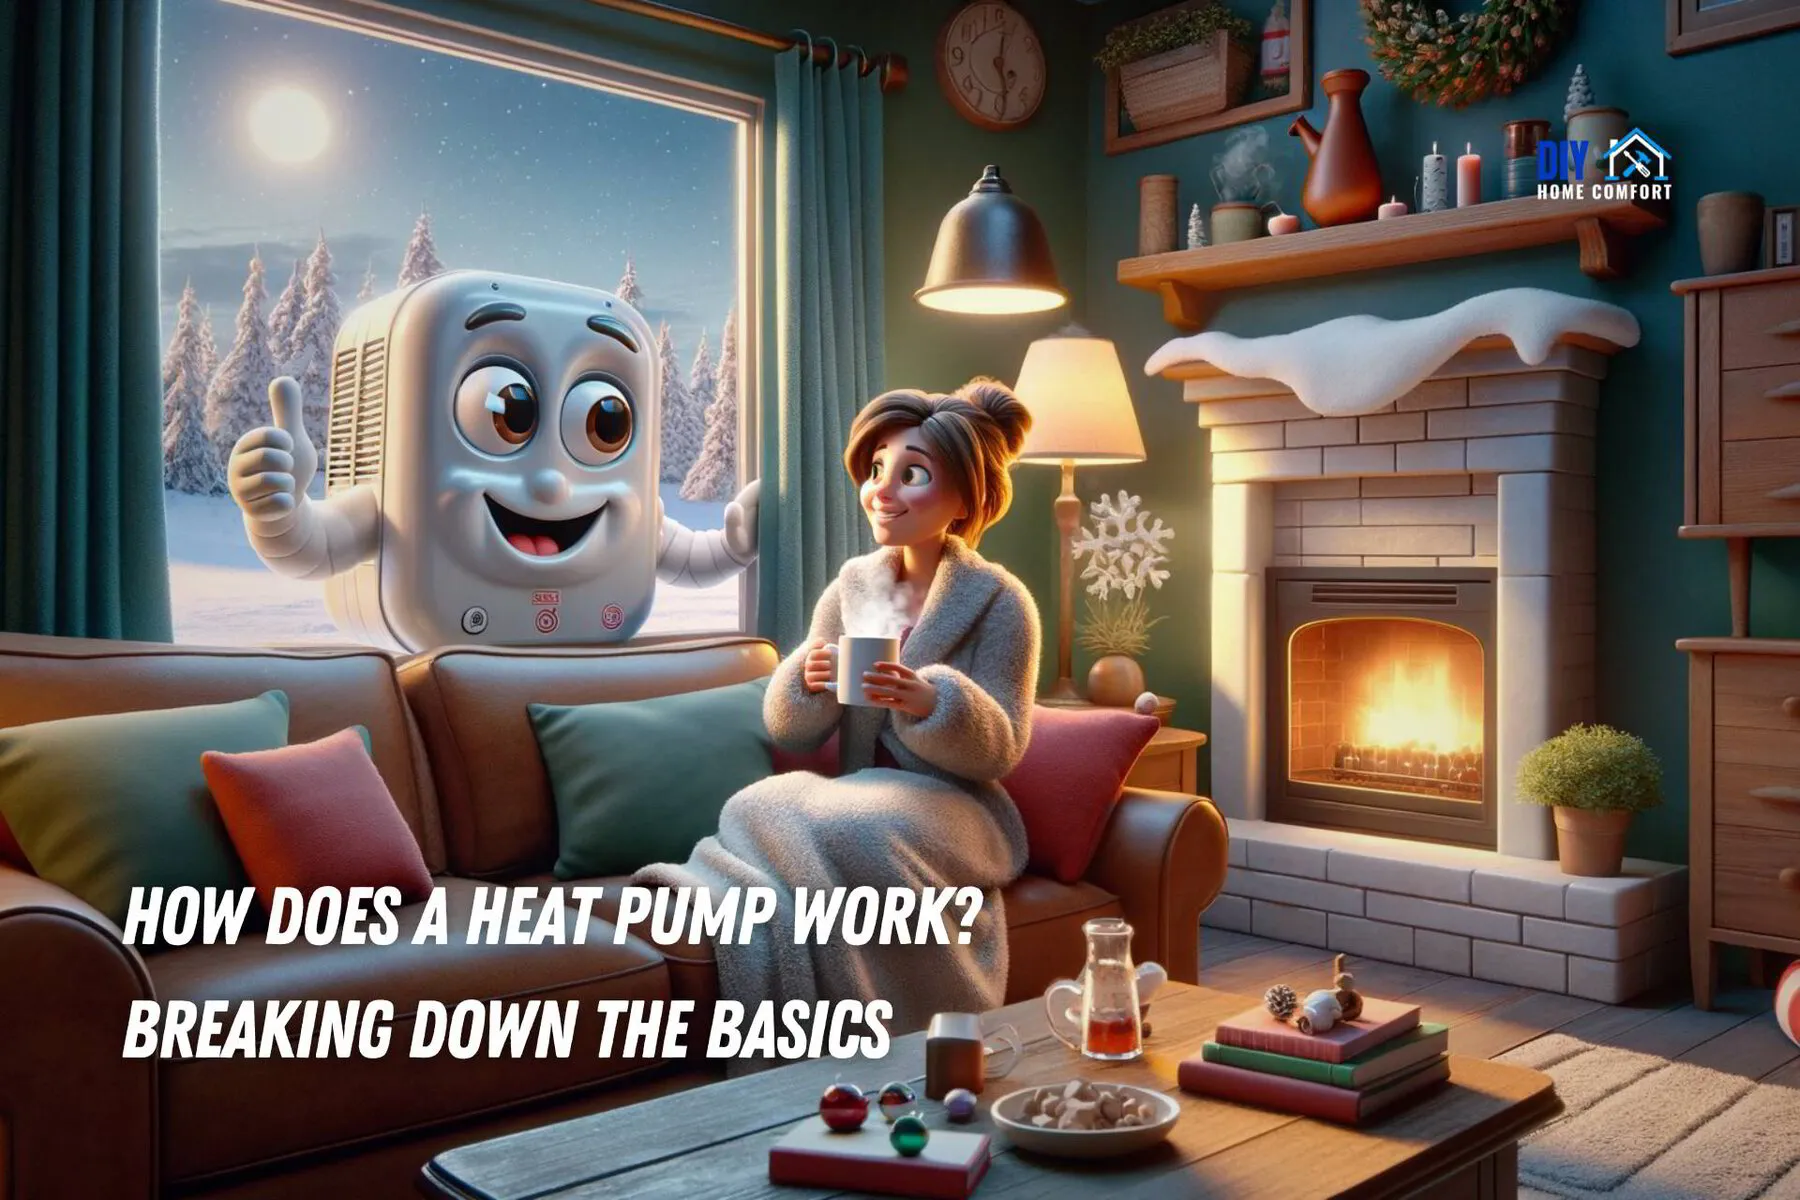 How Does a Heat Pump Work? Breaking Down the Basics  | DIY Home Comfort